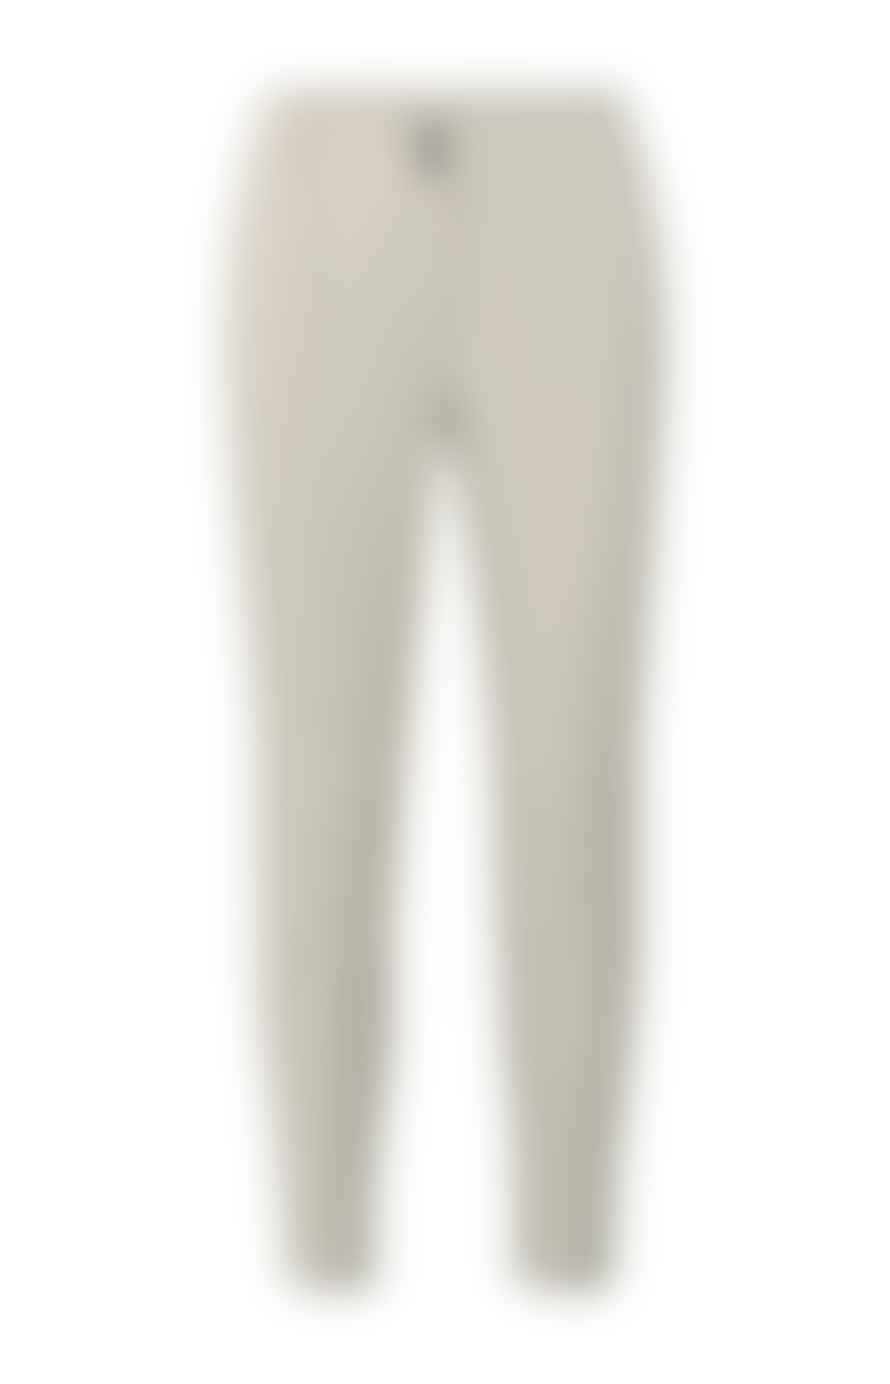 Yaya Pure Cashmere Brown Mel Slim Fit Trousers with Rib Detail